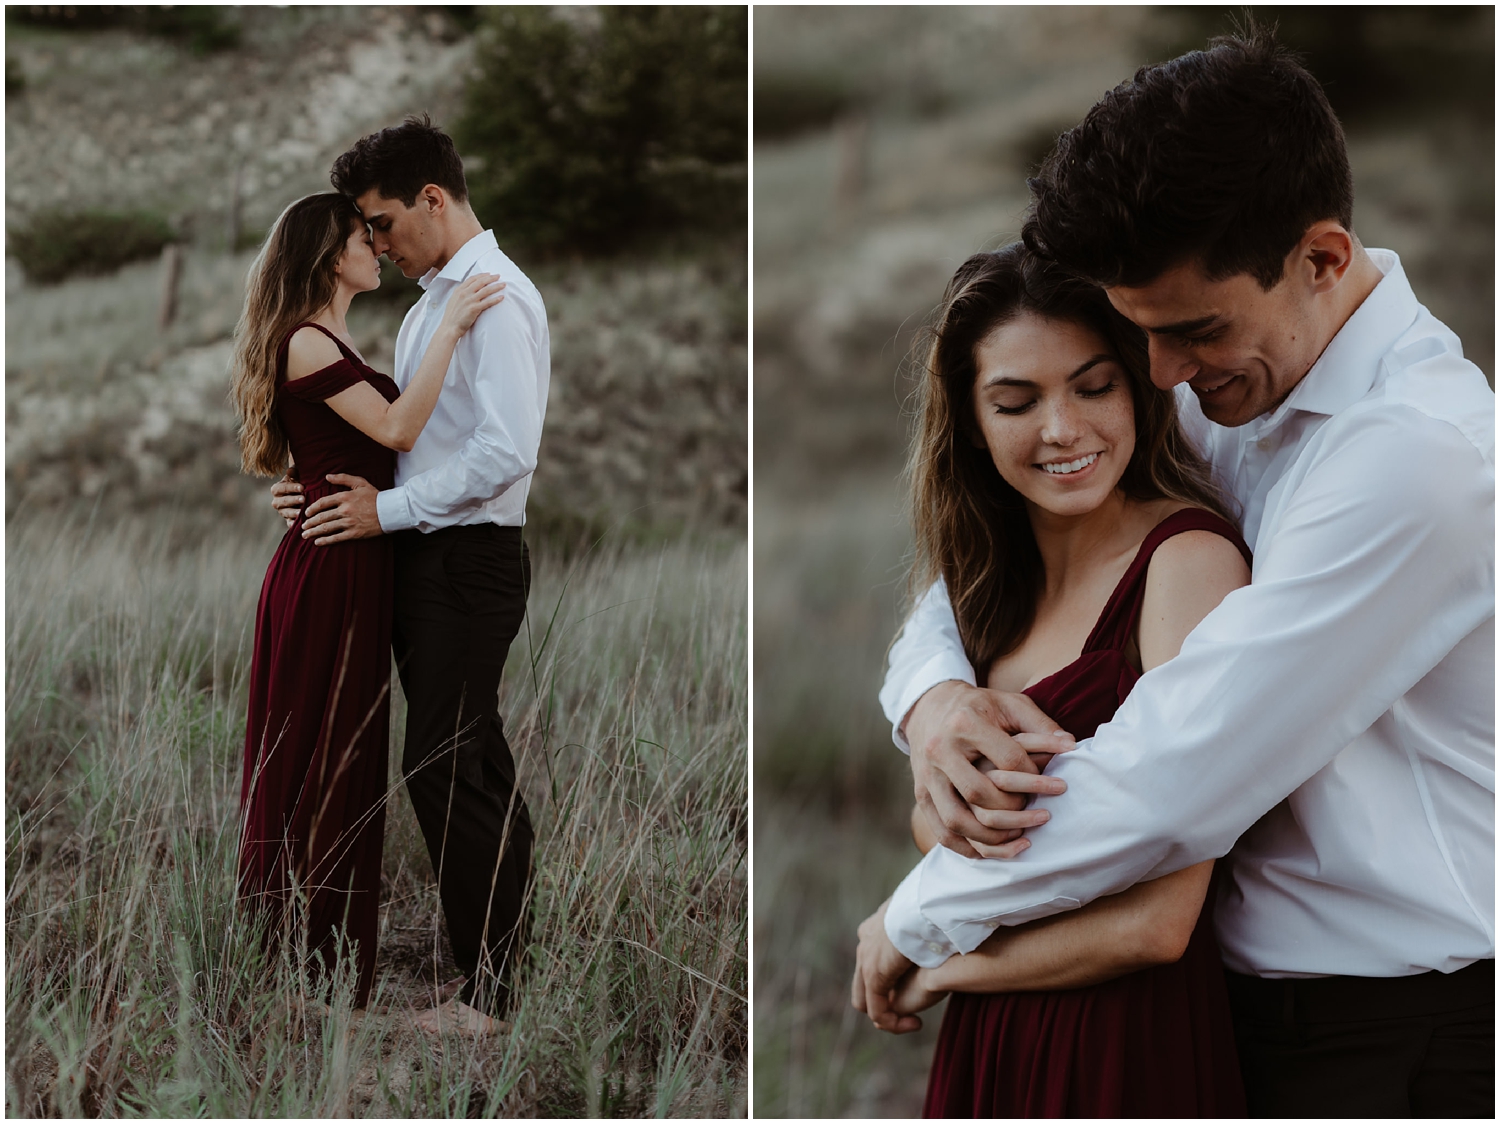 5 Tips To Plan Your Engagement Session